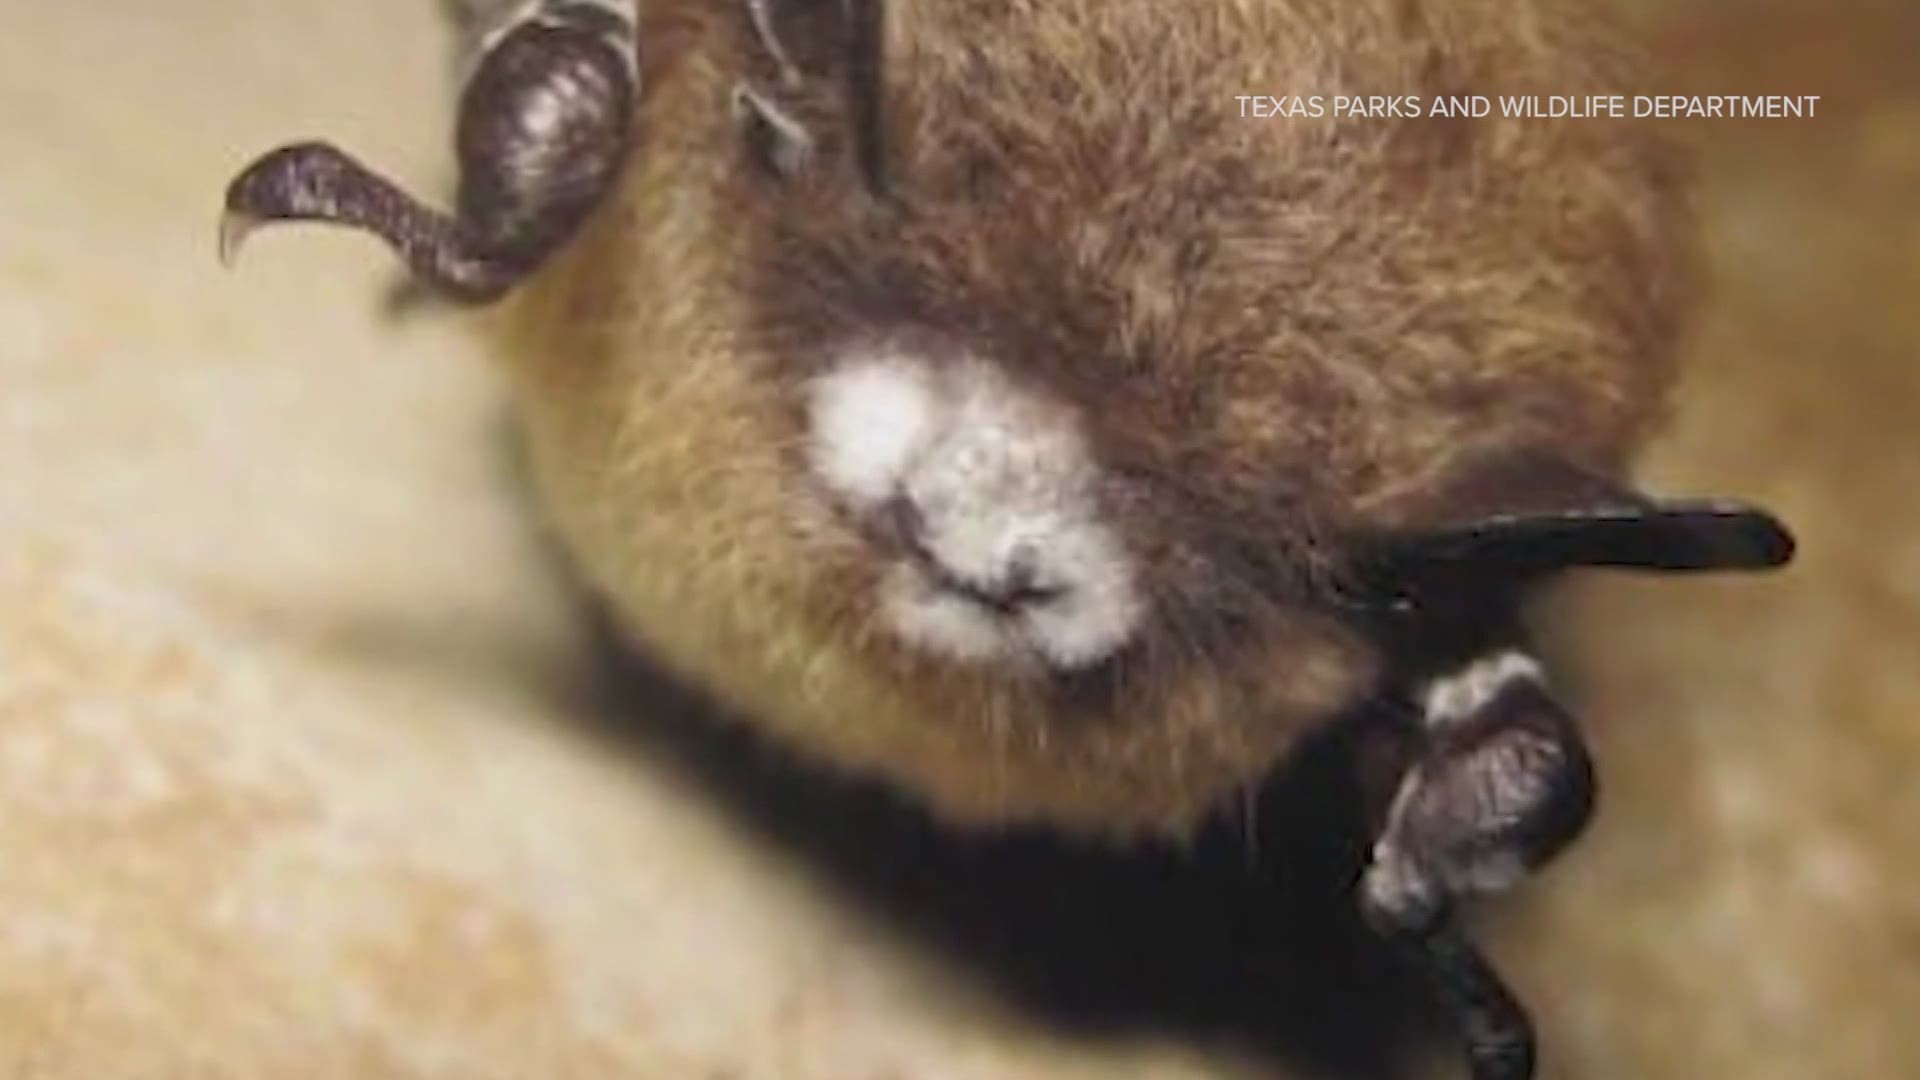 They're looking to see where white-nose syndrome is spreading. It's a disease that is killing the state's bat population.